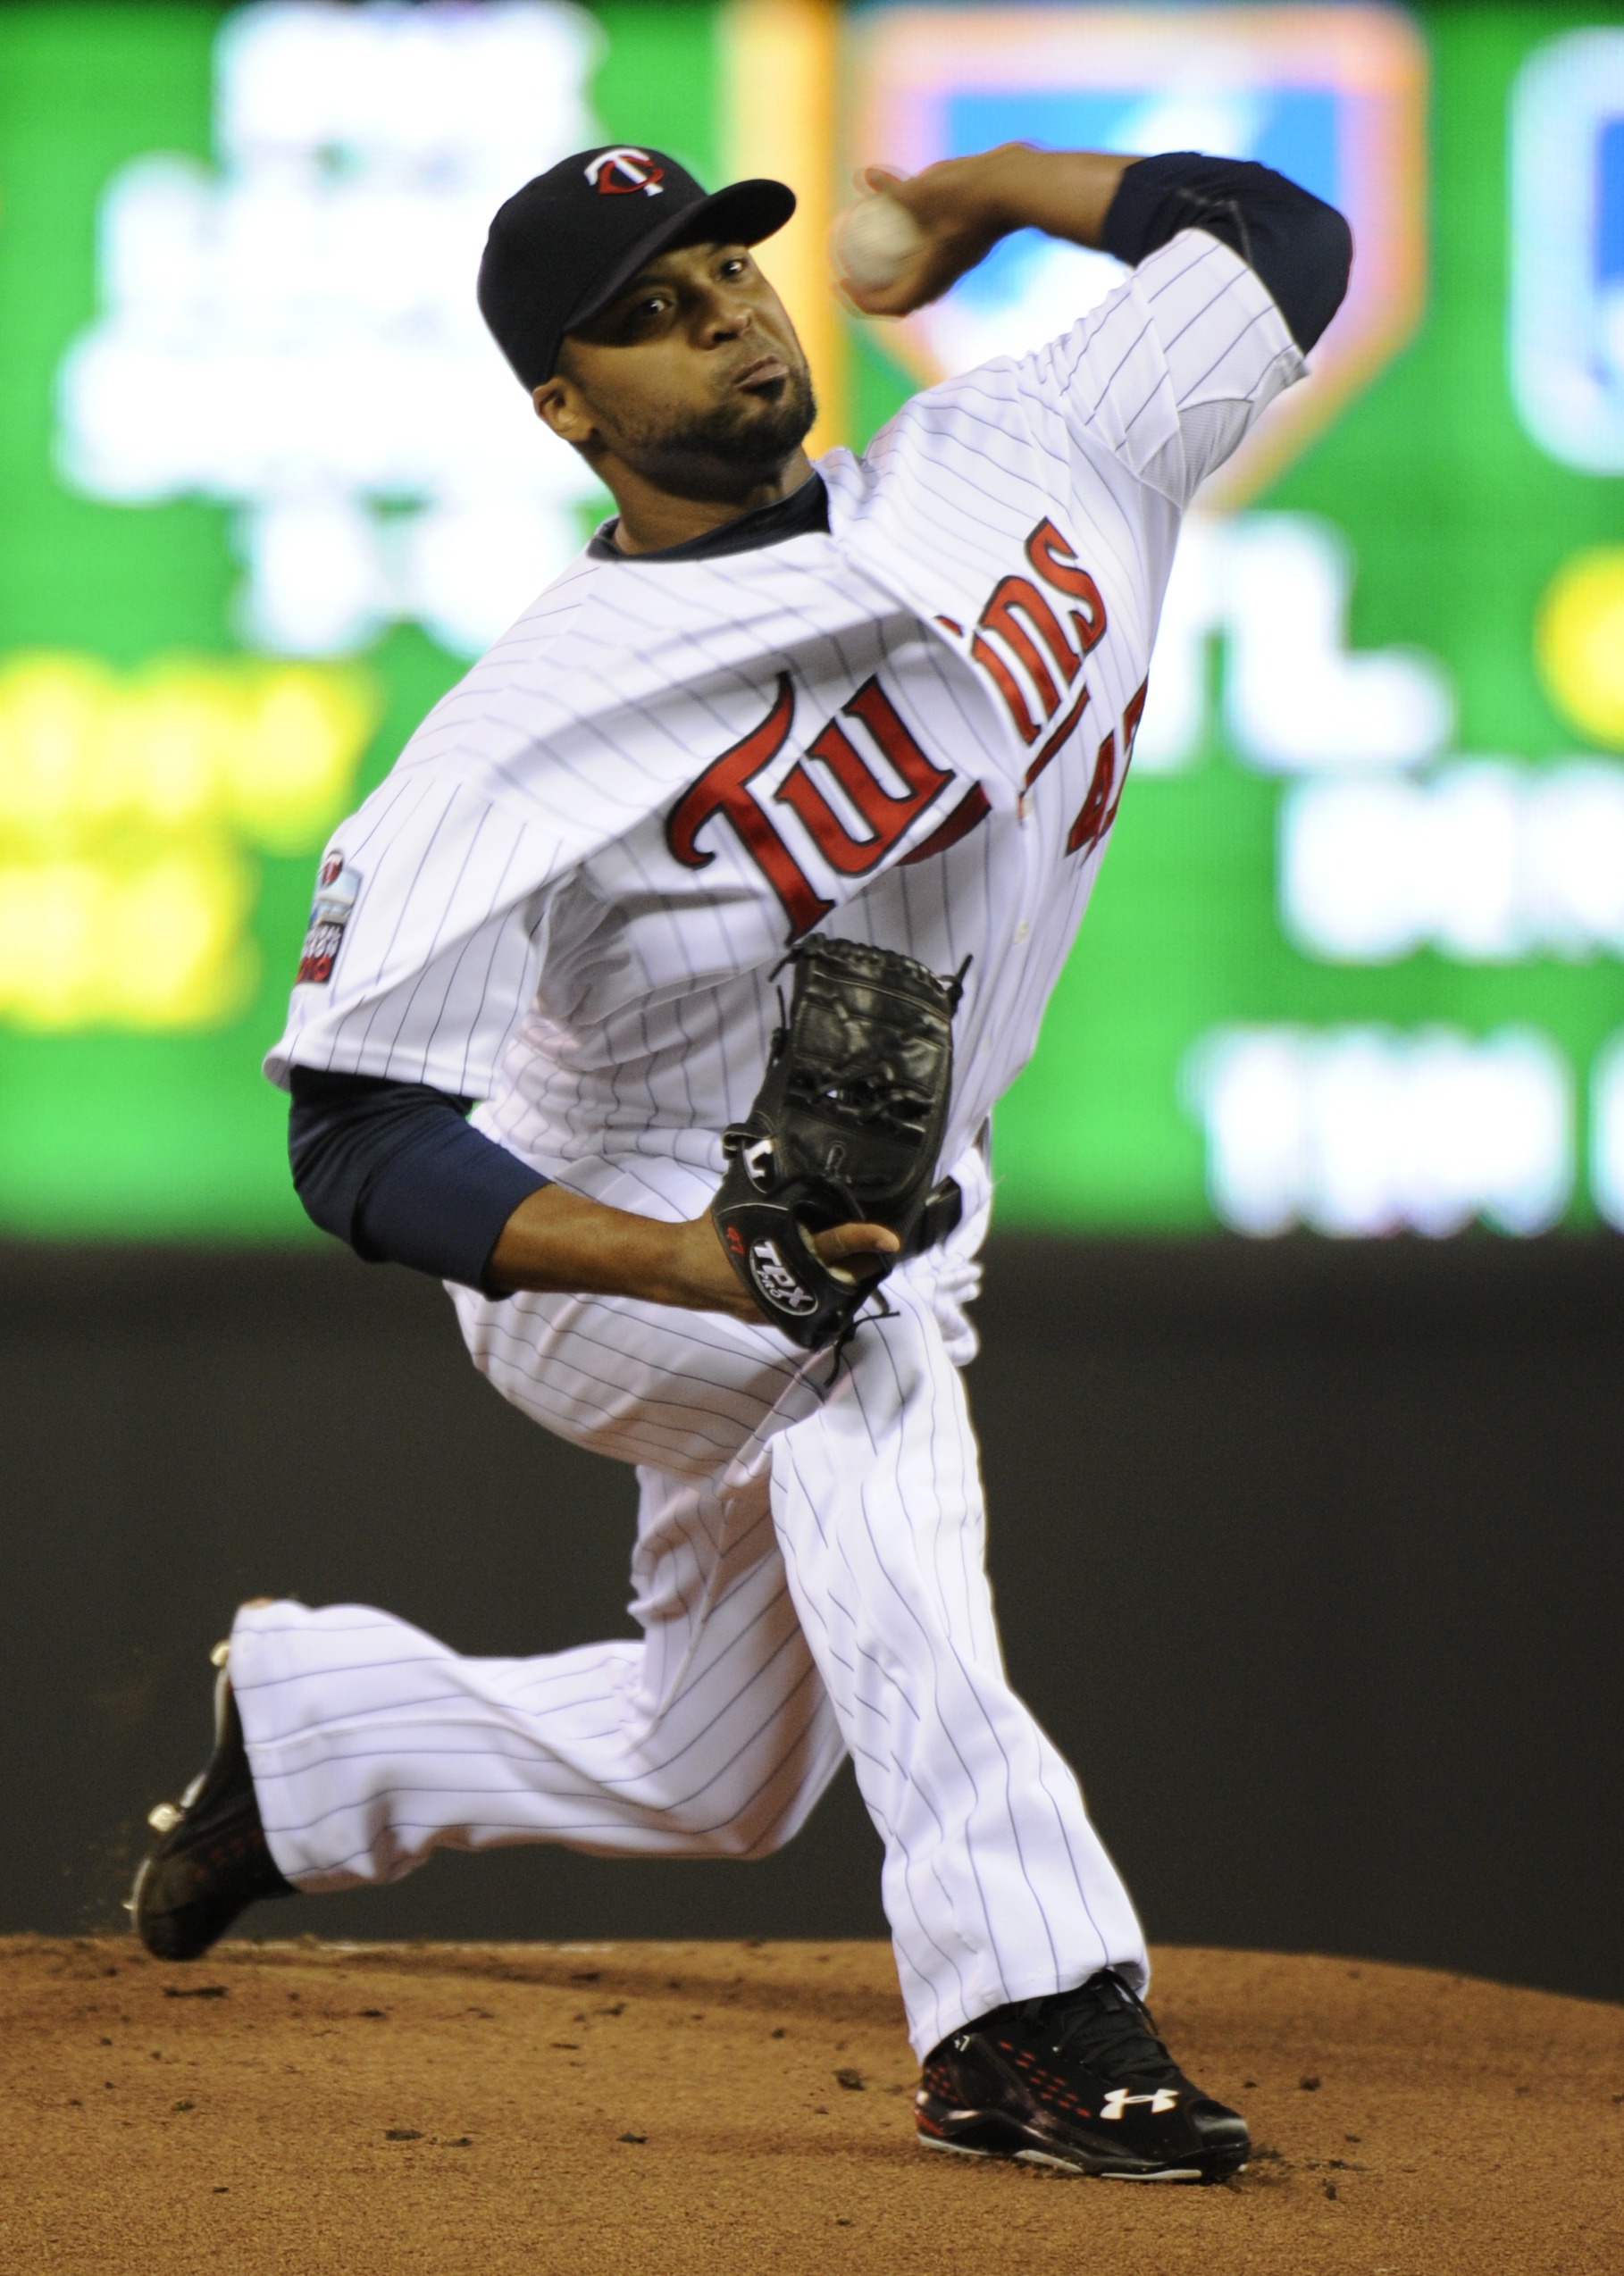 MINNEAPOLIS, MN - OCTOBER 6: Francisco Liriano #47 of the Minnesota Twins pitches during game one of the ALDS against the New York Yankees on October 6, 2010 at Target Field in Minneapolis, Minnesota. (Photo by Hannah Foslien /Getty Images)